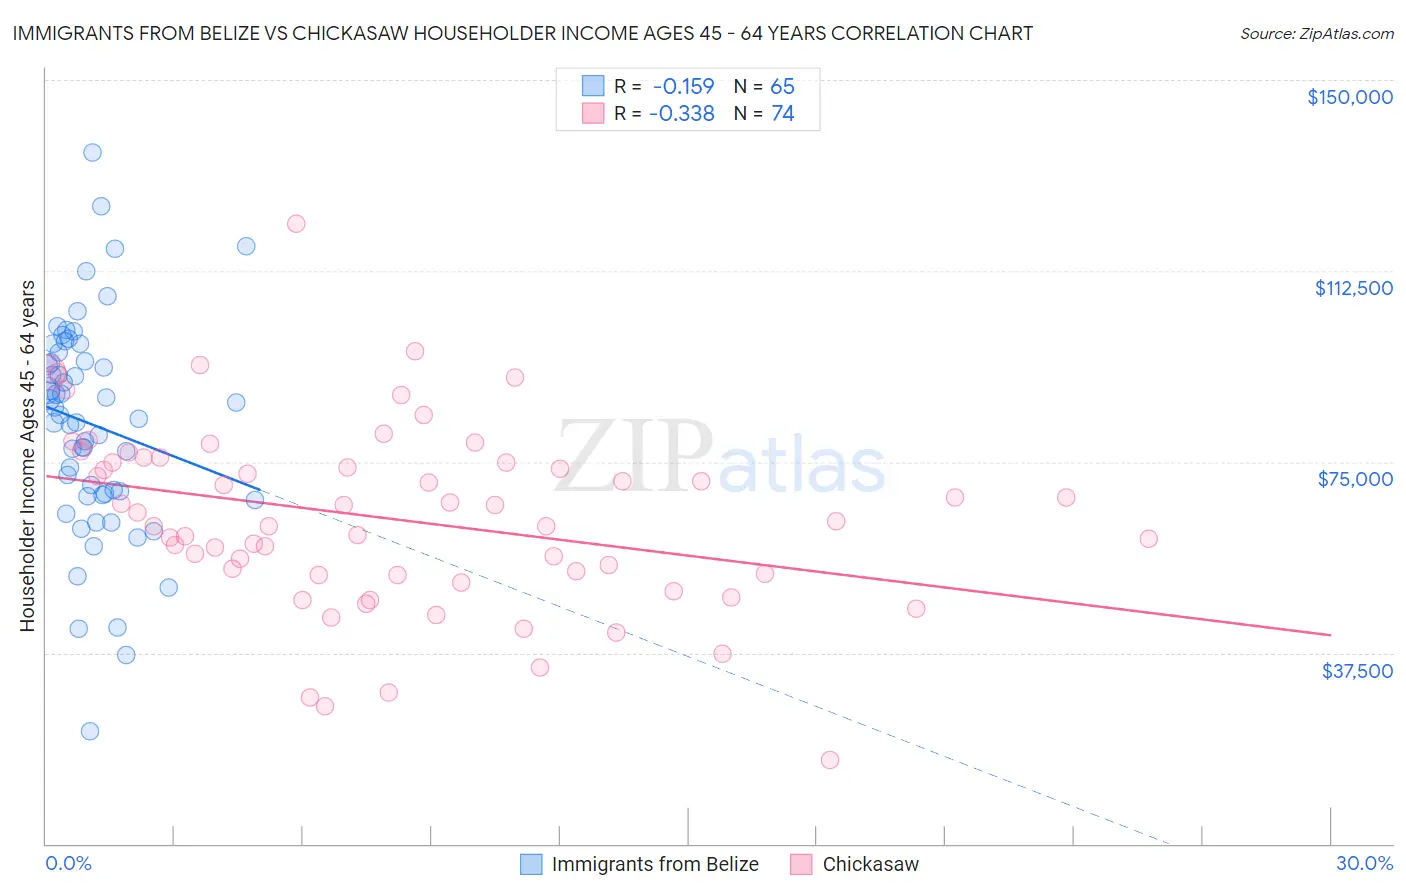 Immigrants from Belize vs Chickasaw Householder Income Ages 45 - 64 years